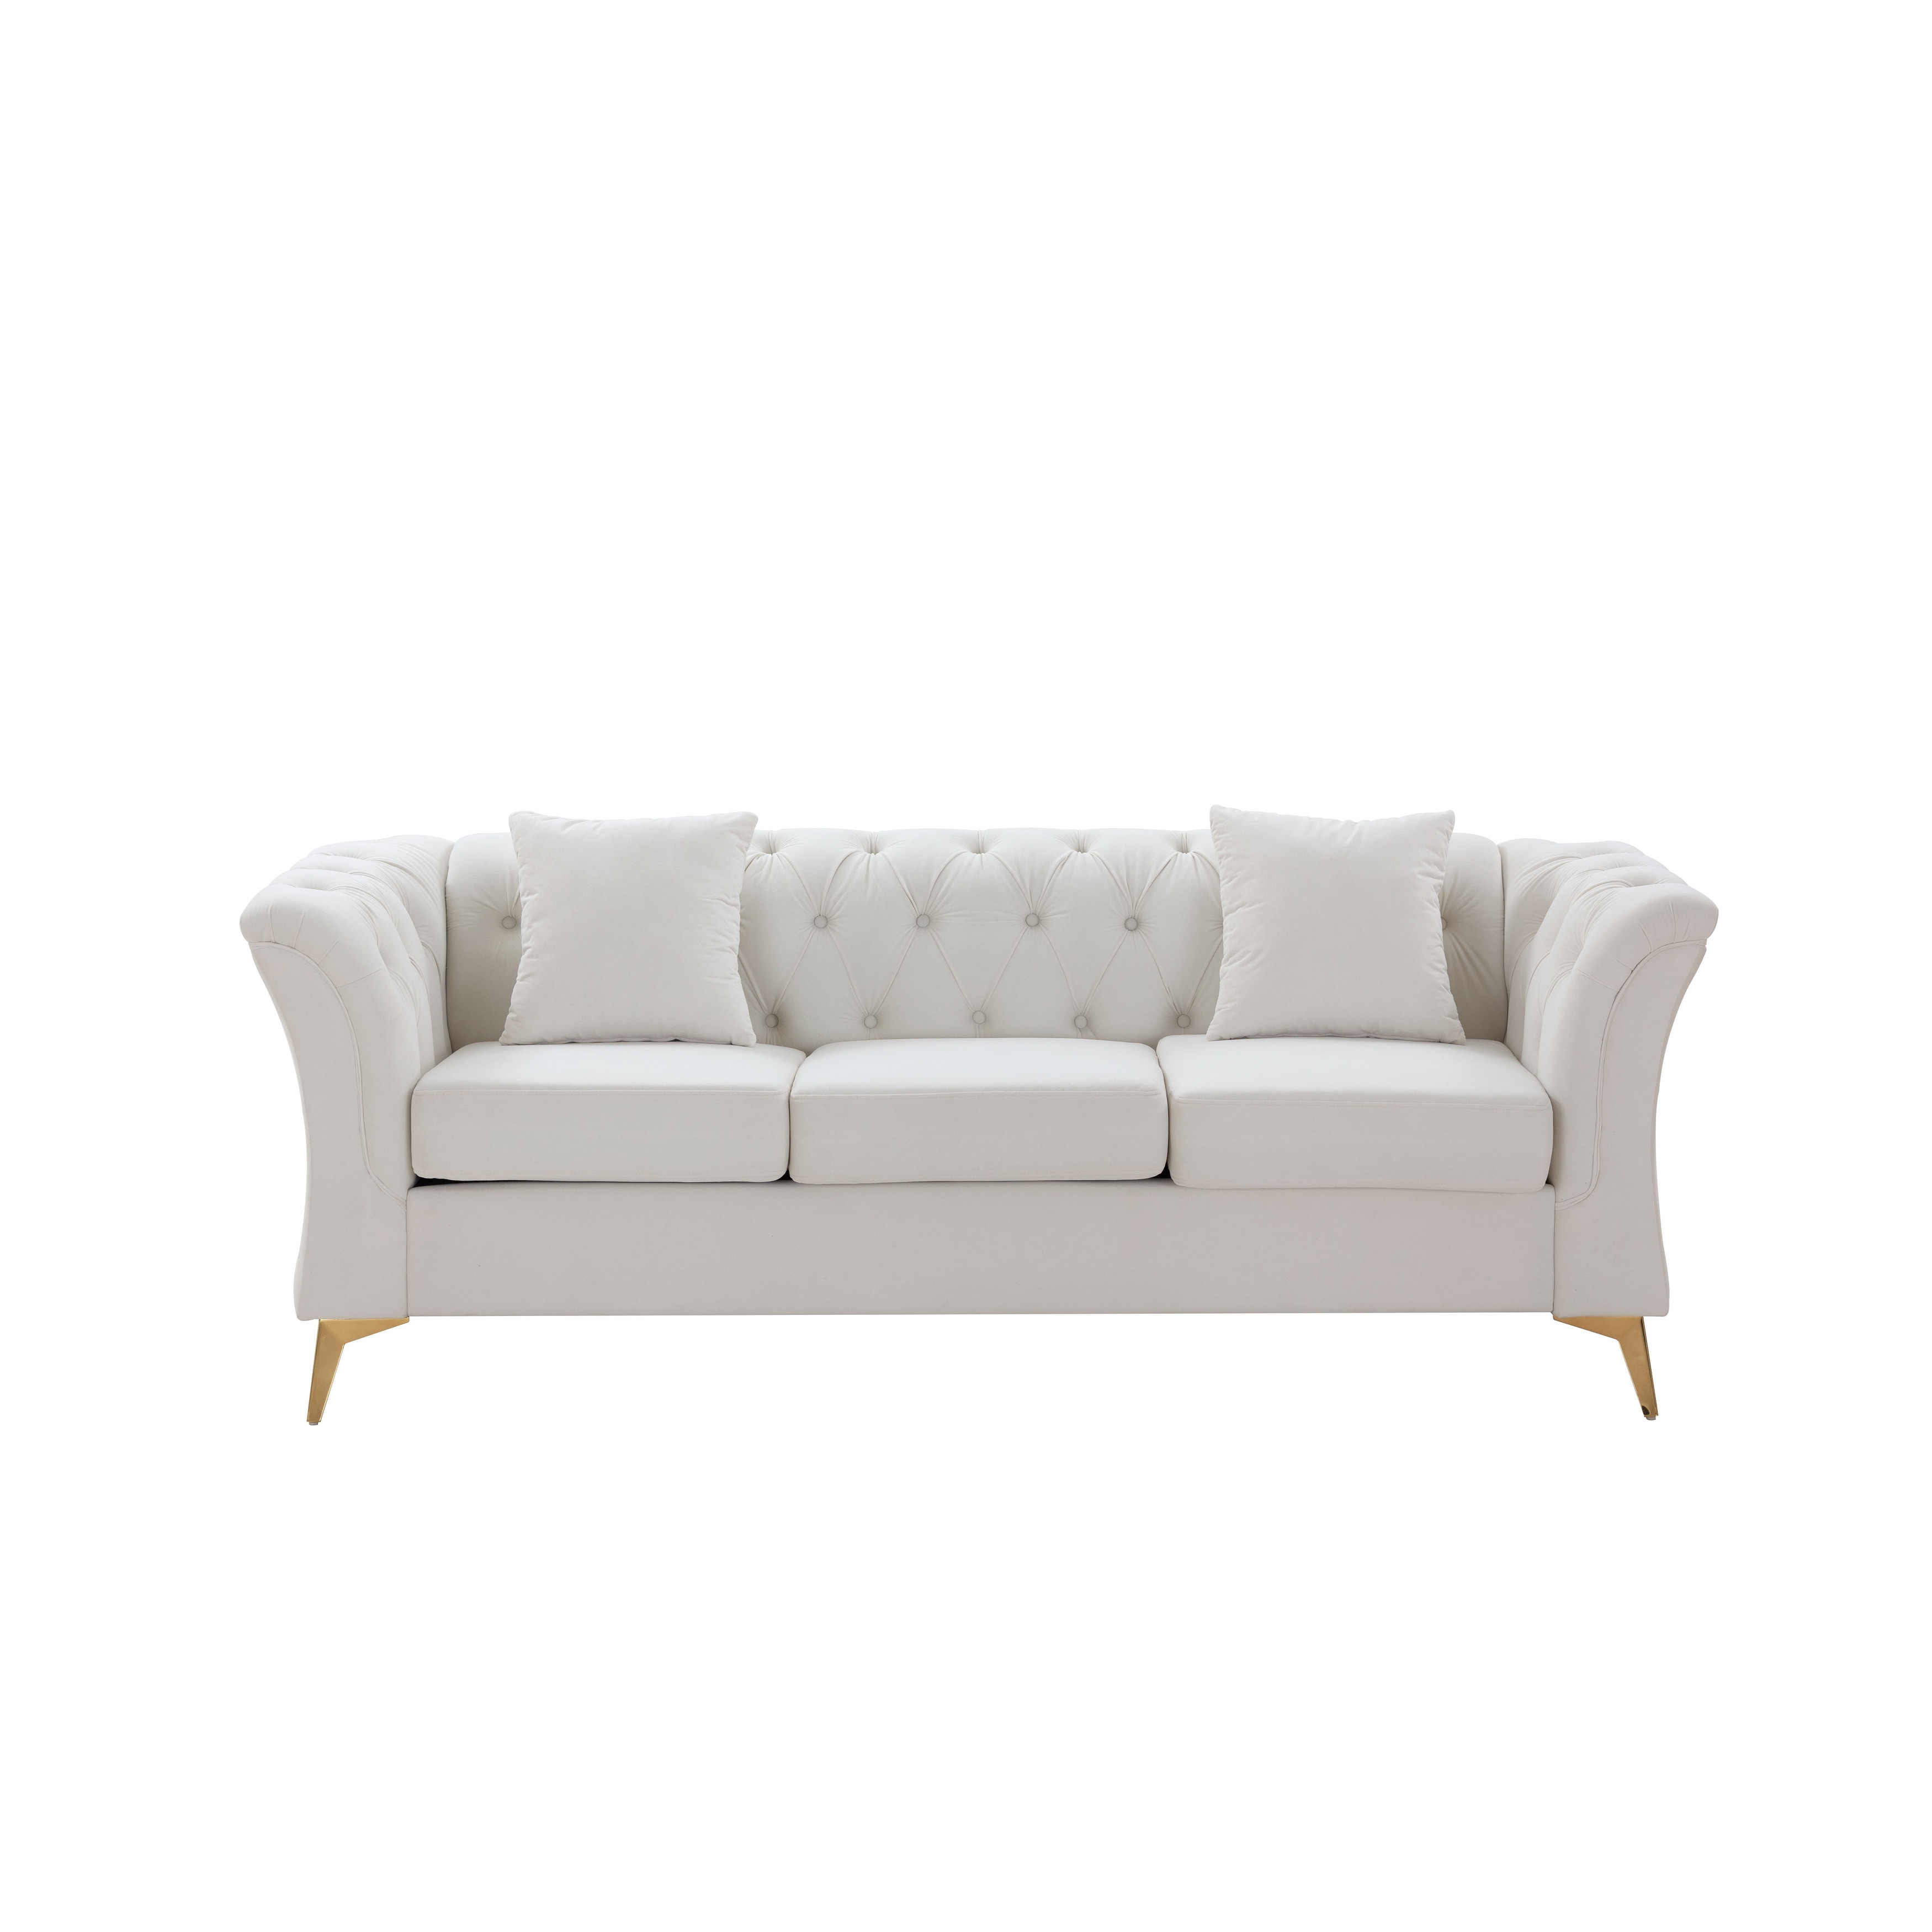 Tufted Velvet Sofa With Gold Metal Legs - Perfect For Living Room